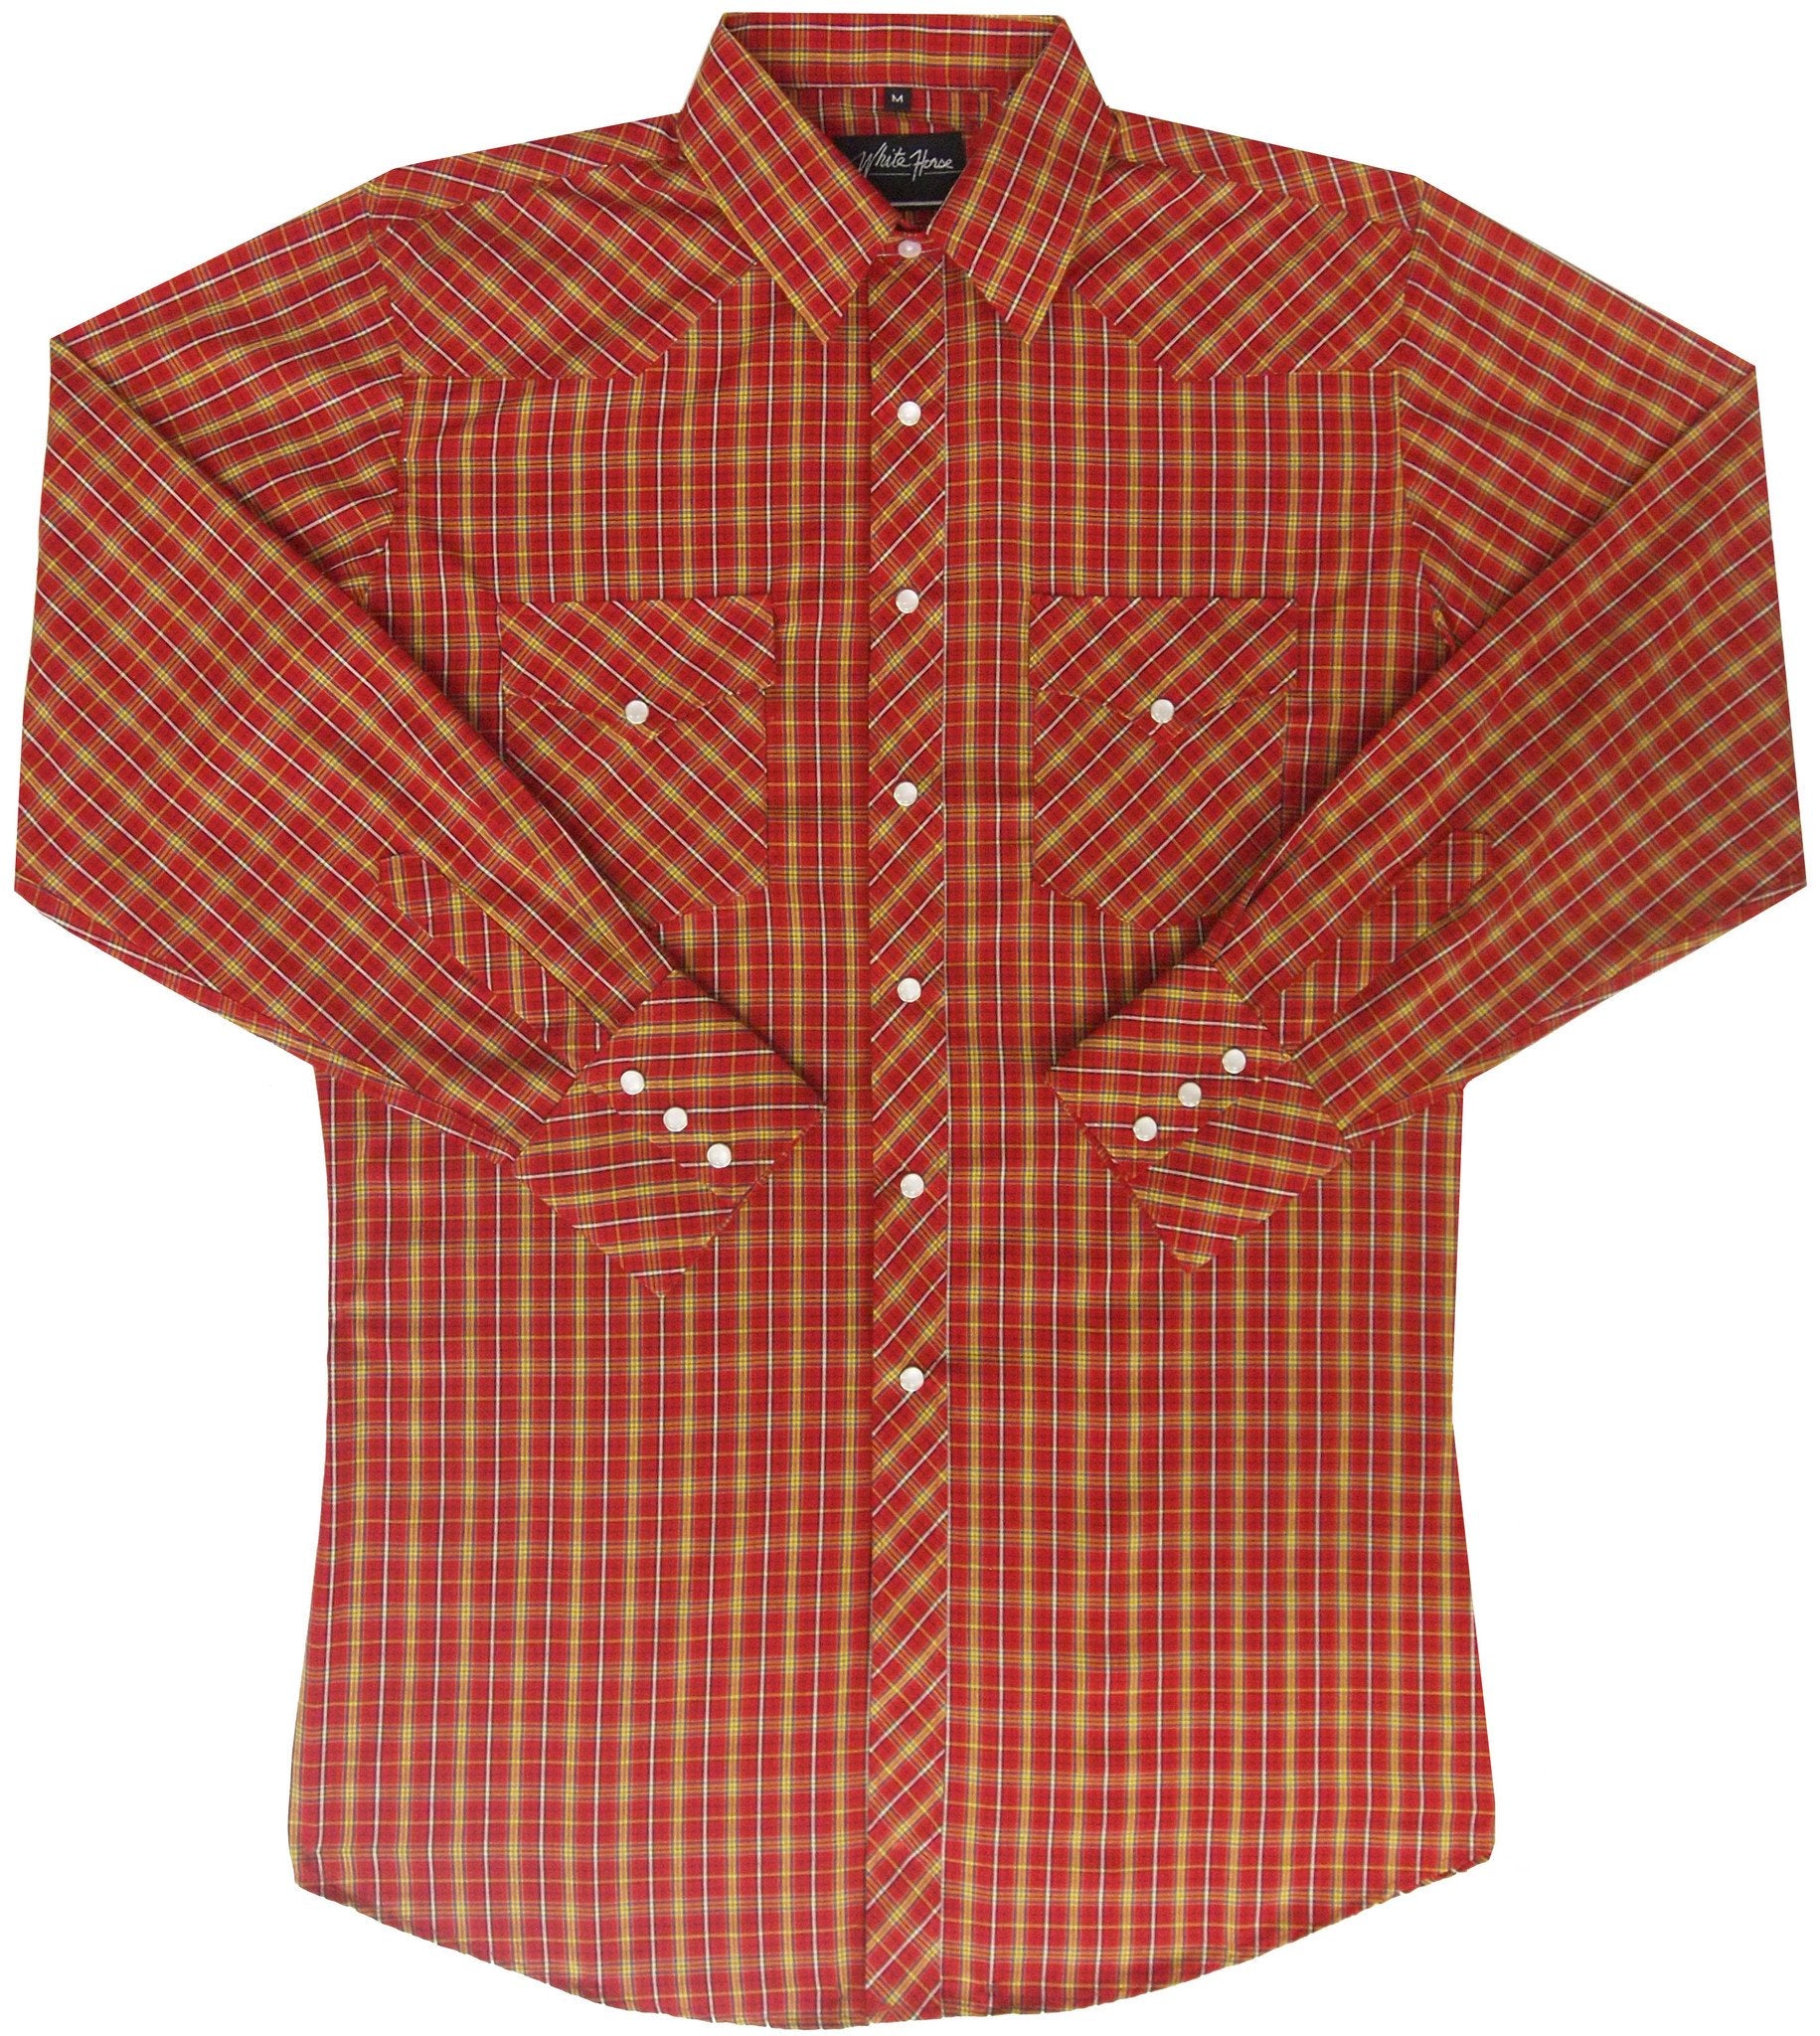 White Horse Apparel Men's Western Shirt Plaid Red Gold White